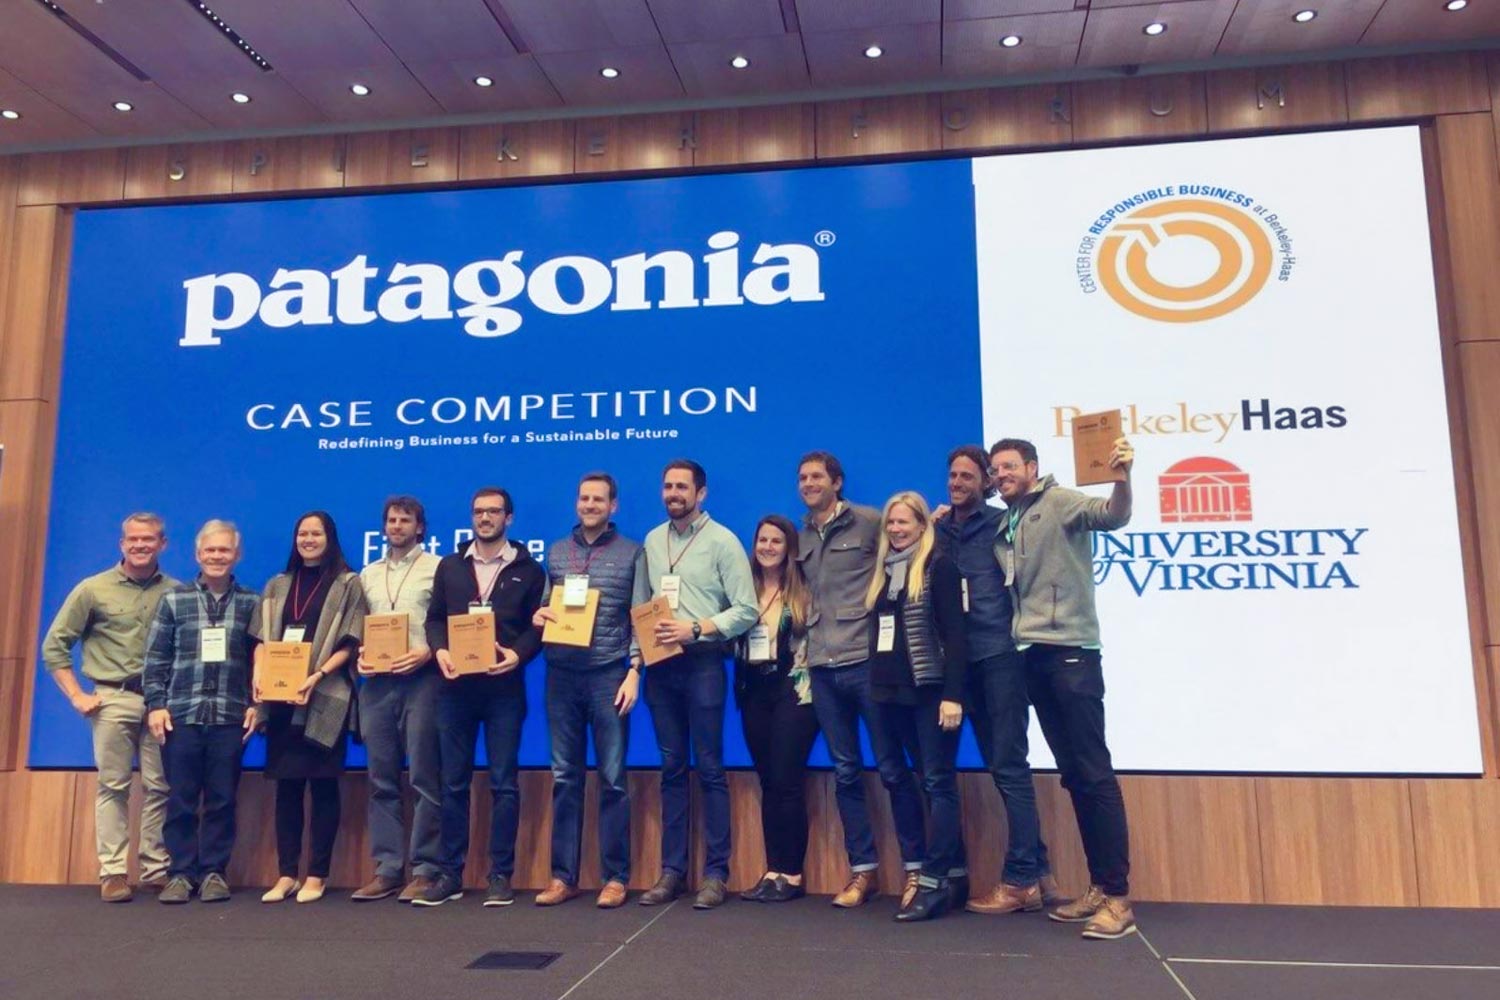 UVA team stands on stage holding their awards after a case competition